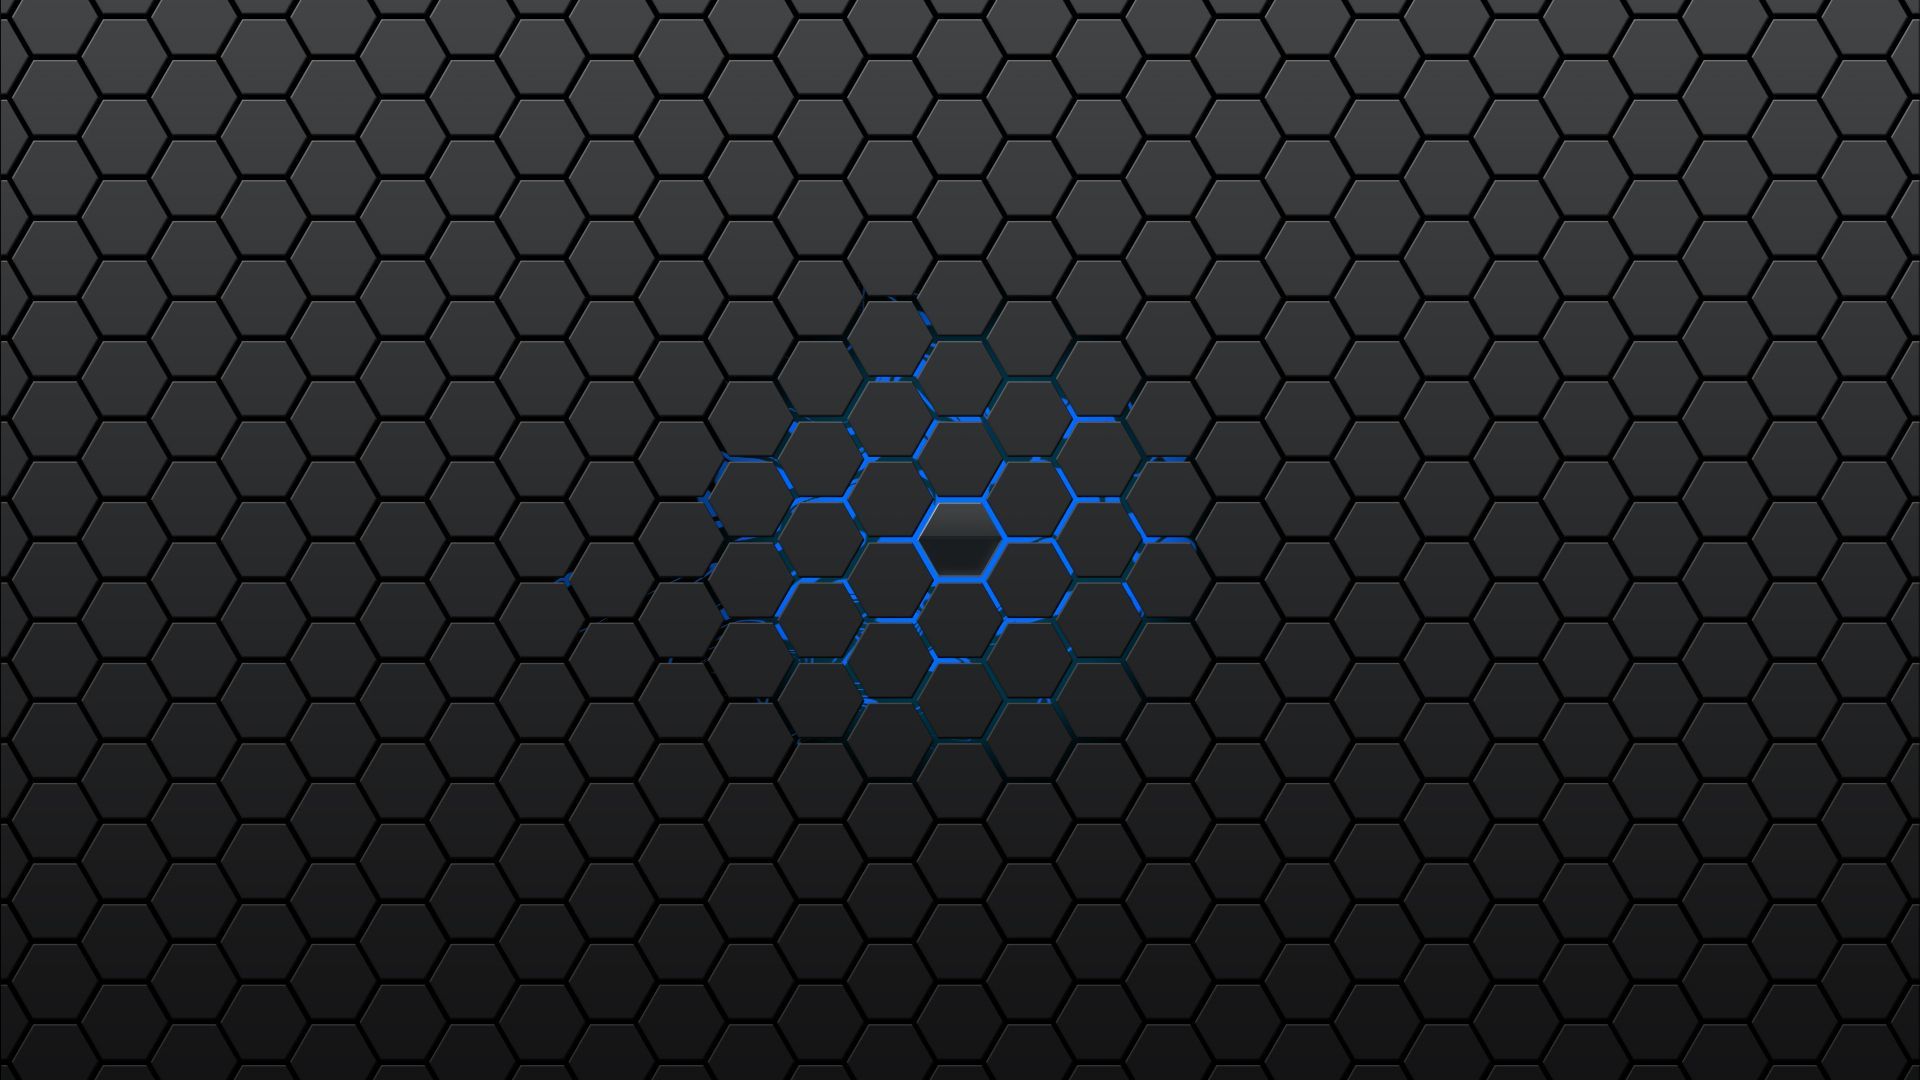 Abstract Hexagon Pattern Artistic HD Wallpaper Background Image